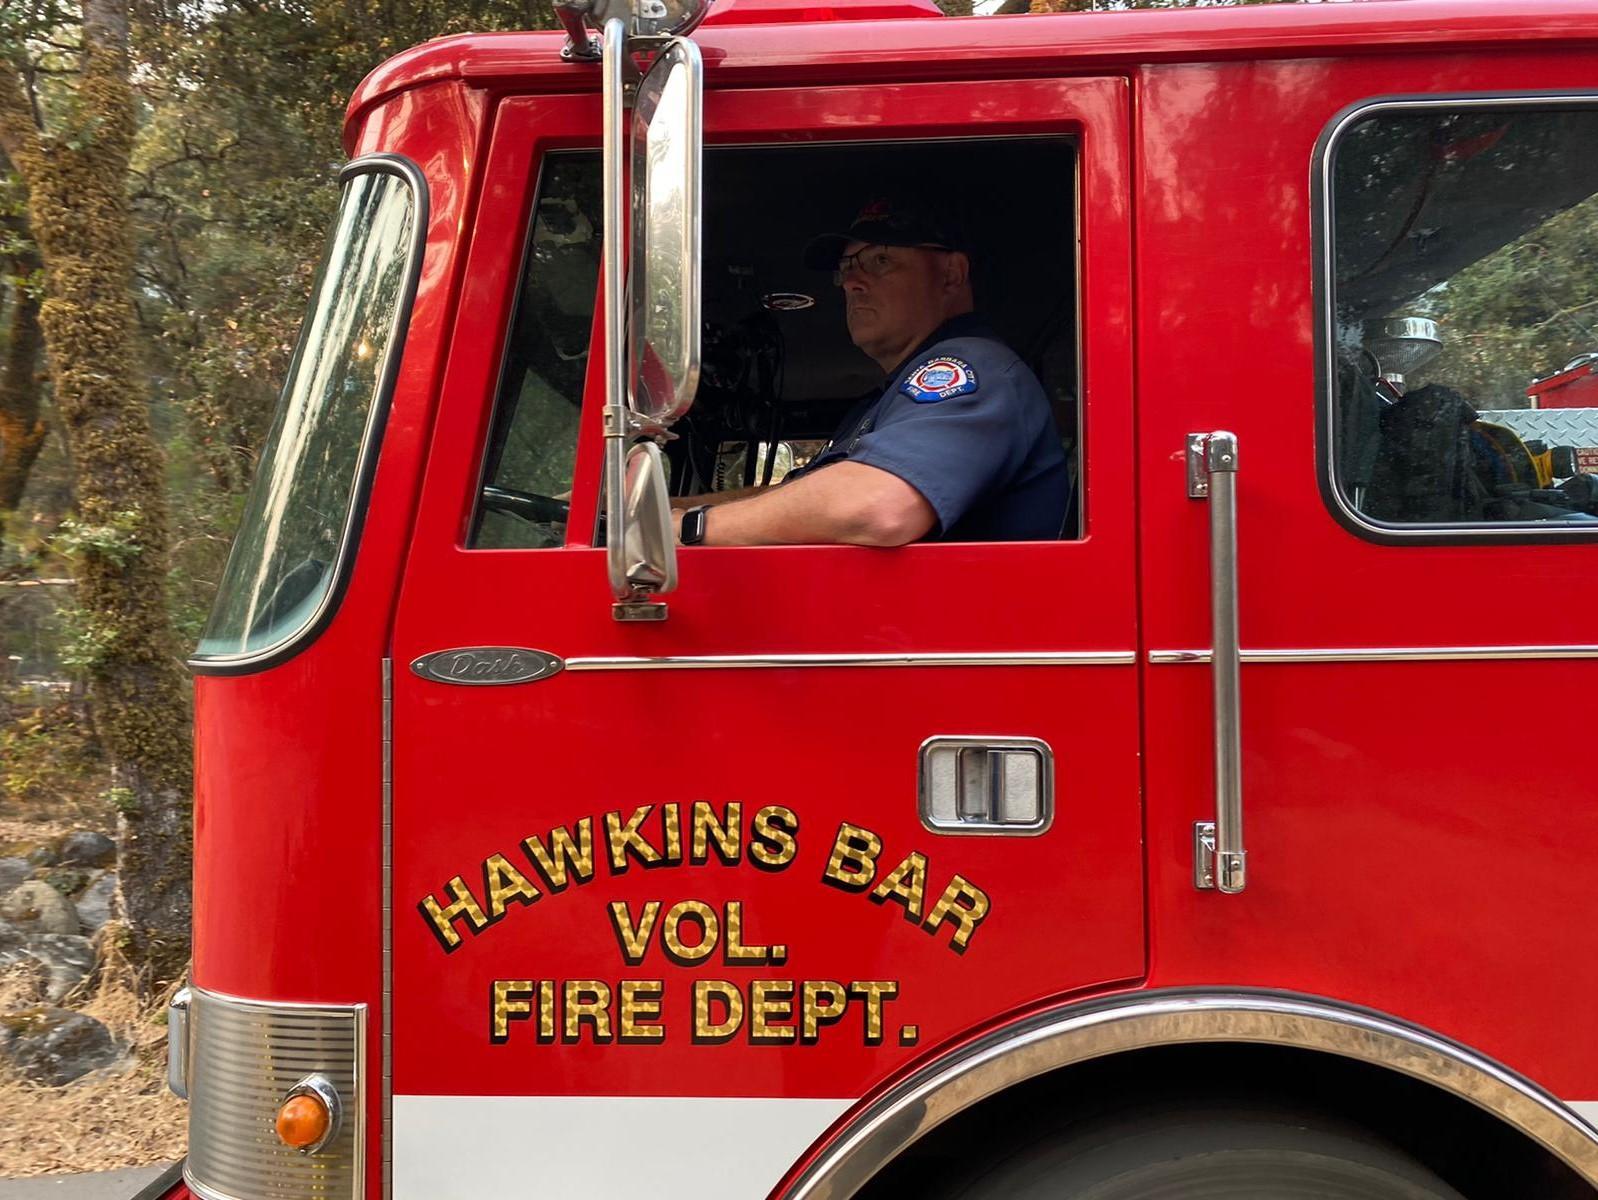 A red firetruck with gold letters reading Hawkins Bar driven by a firefighter in a blue uniform